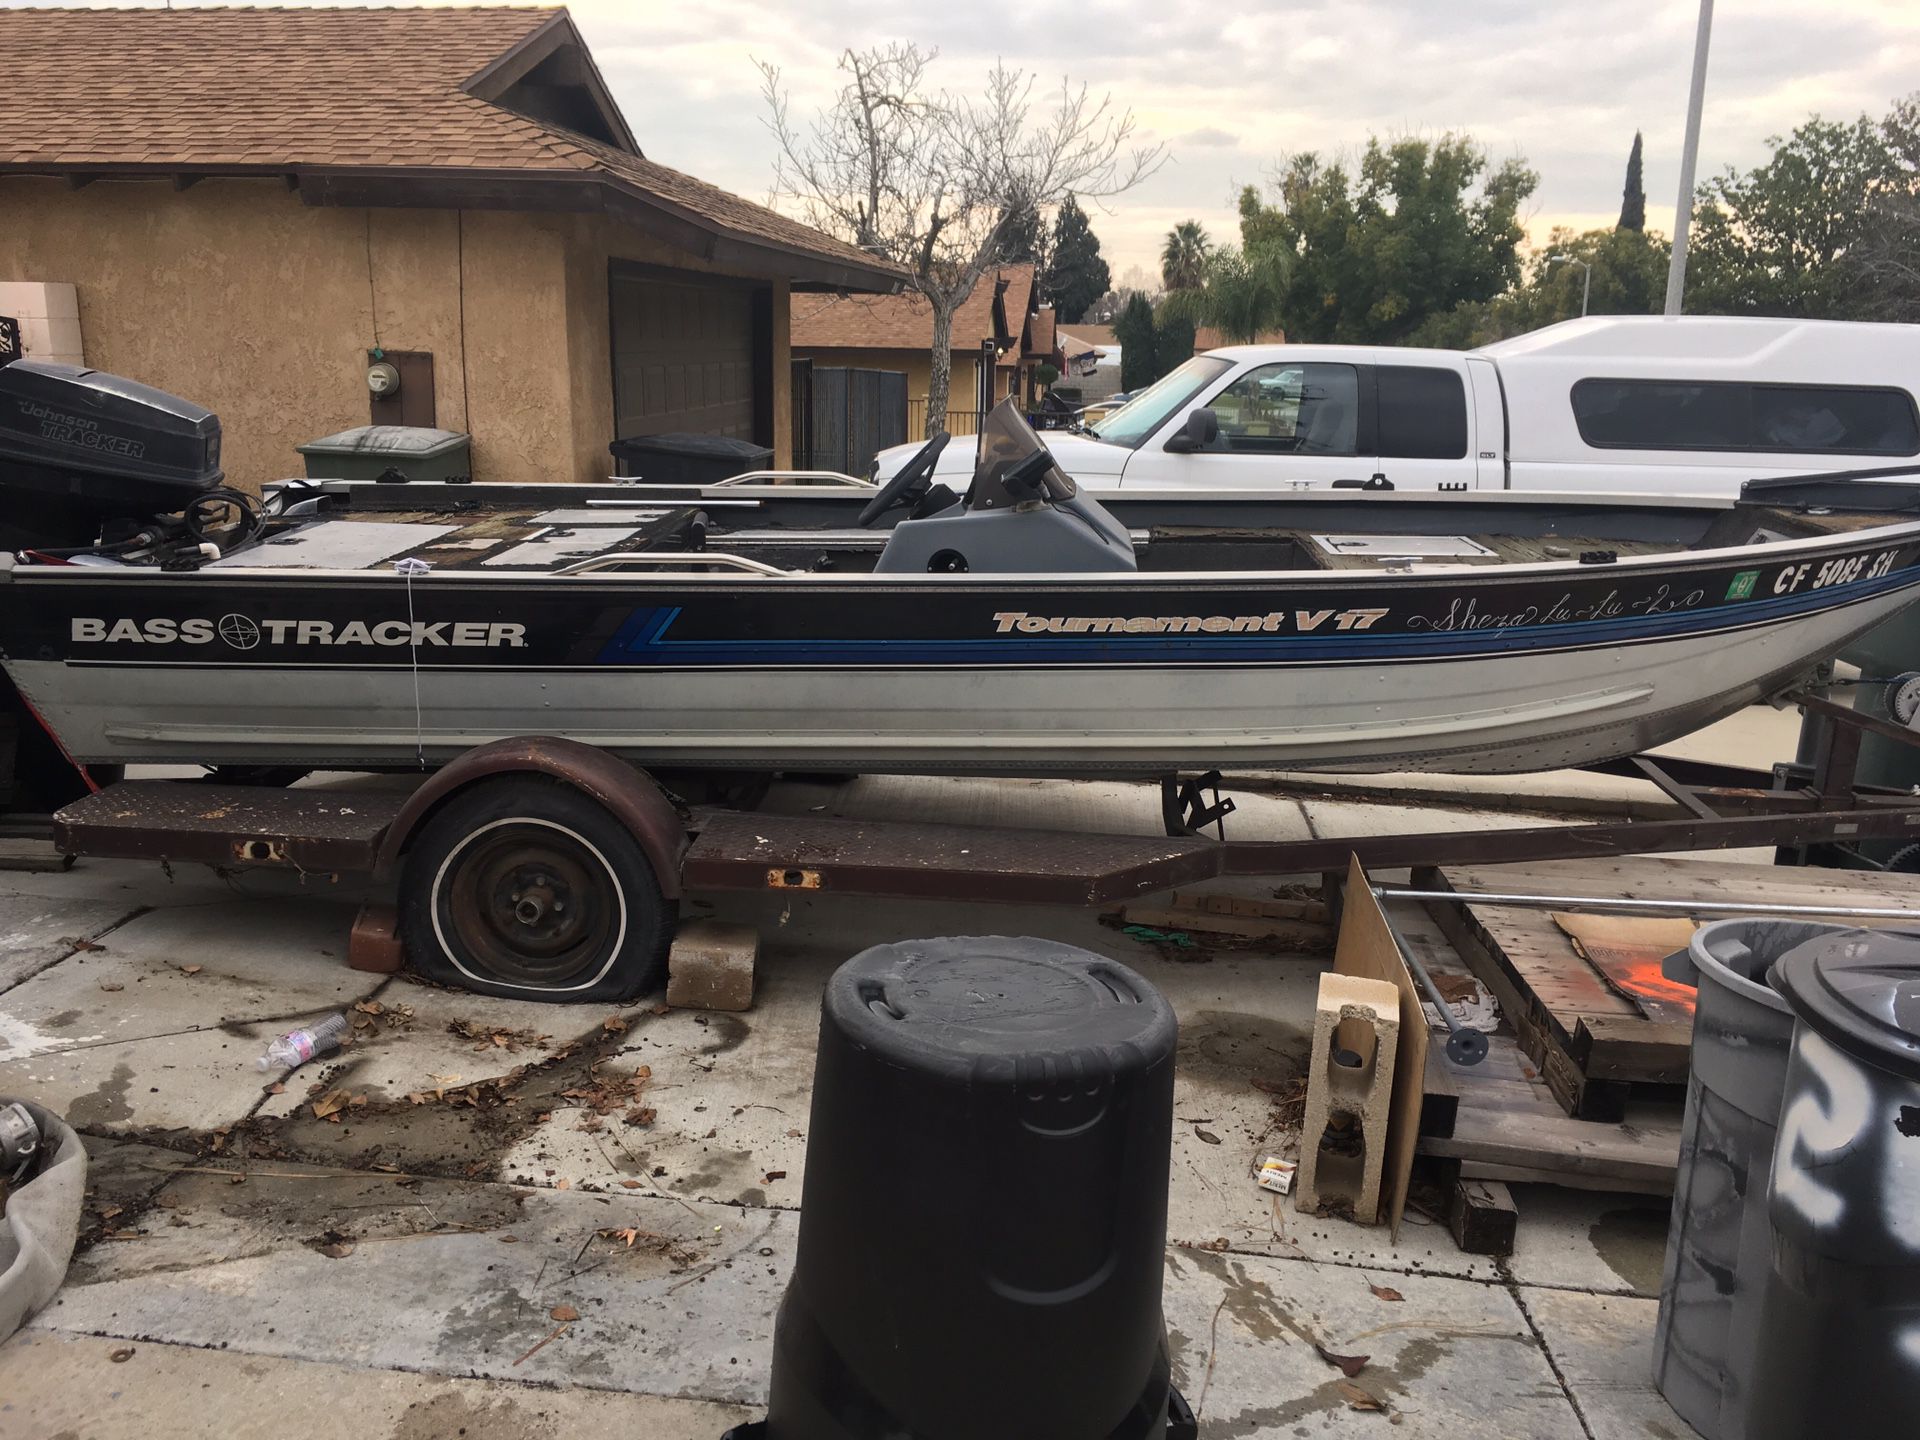 Bass tracker boat {contact info removed}